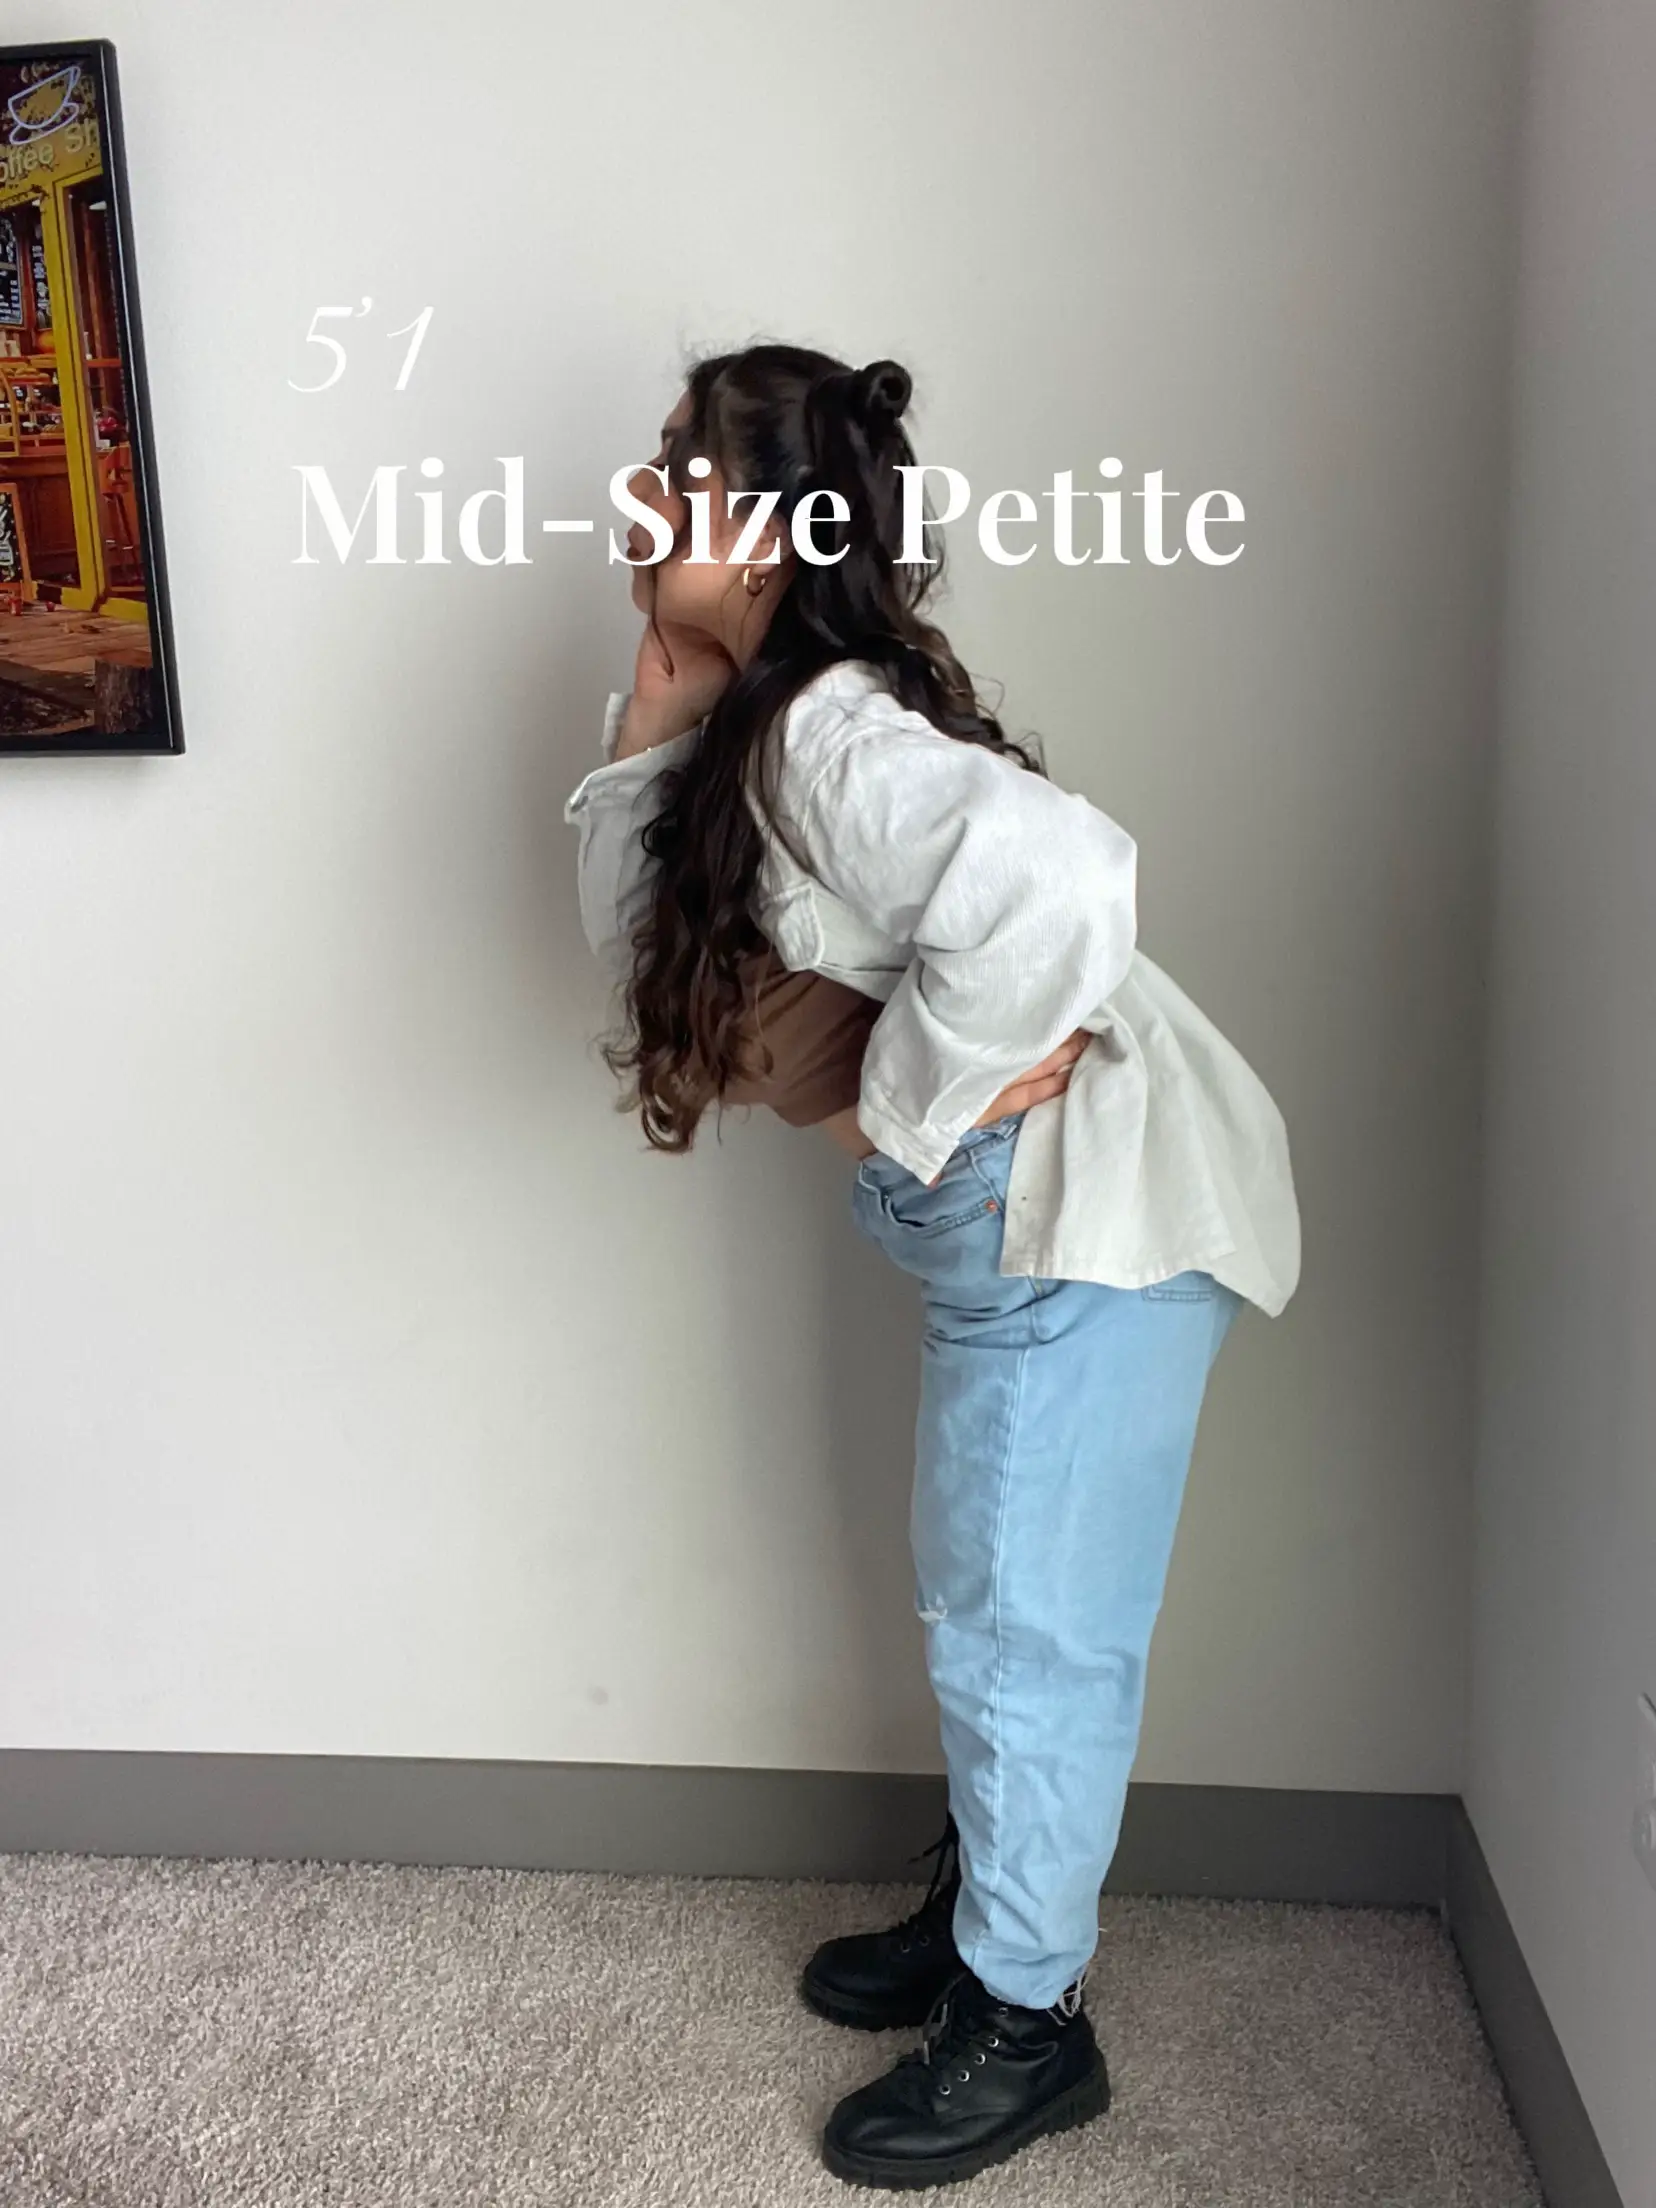 5'1] Shoutout to all the petite queens on here who recommended mom